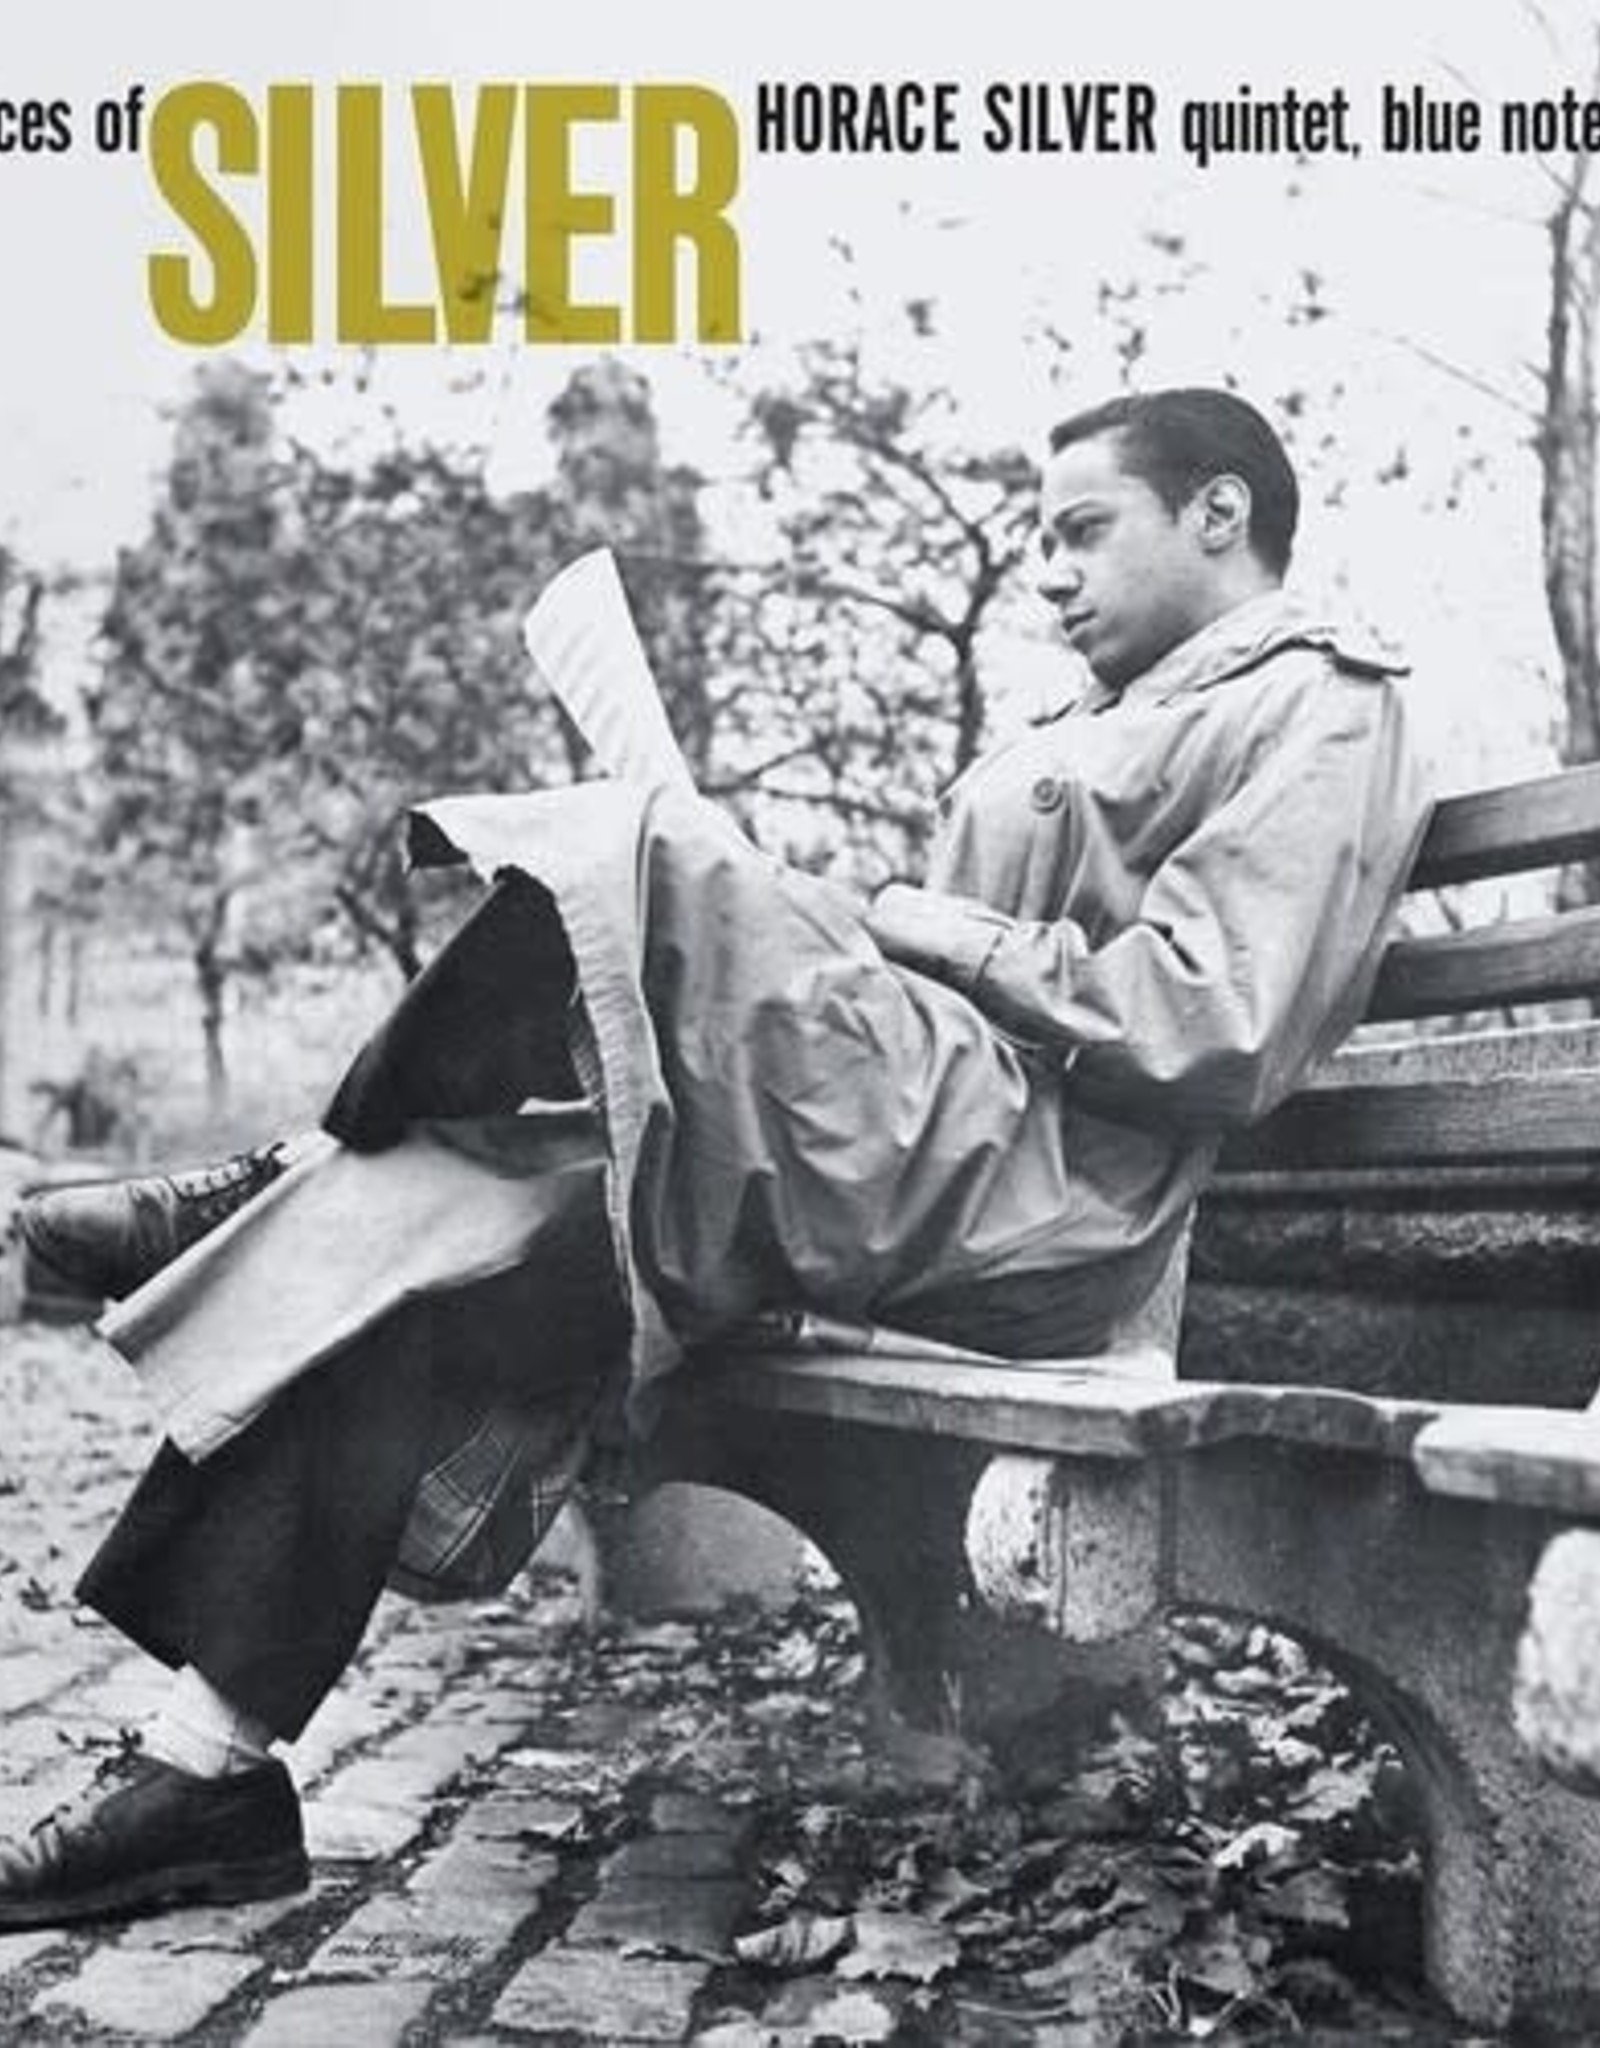 Horace Silver - 6 Pieces of Silver (Analog Master)